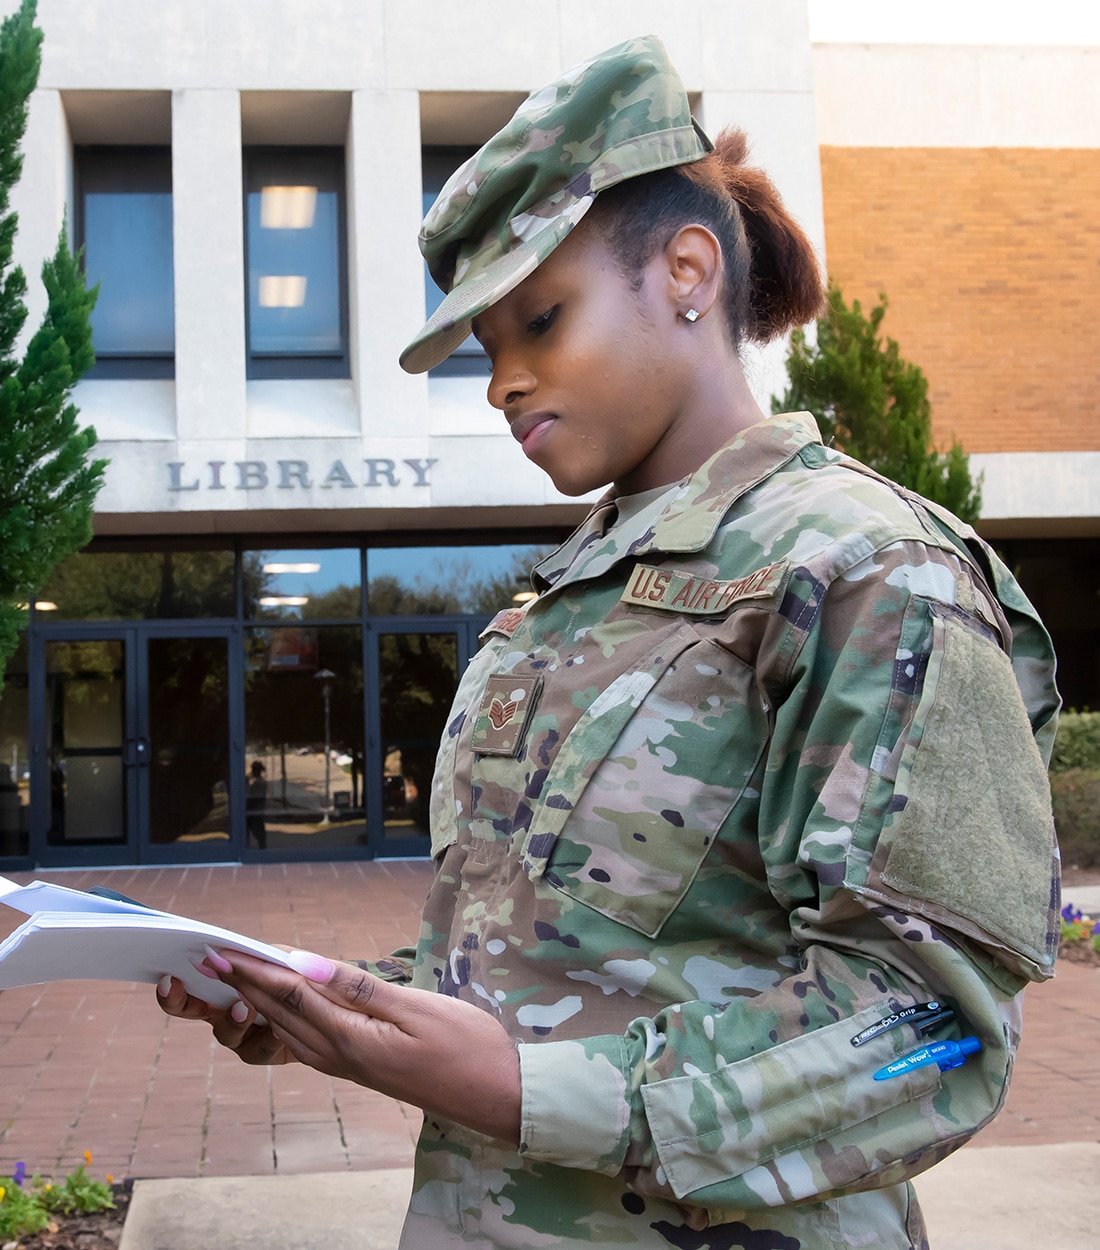 Sgt in camo in front of library